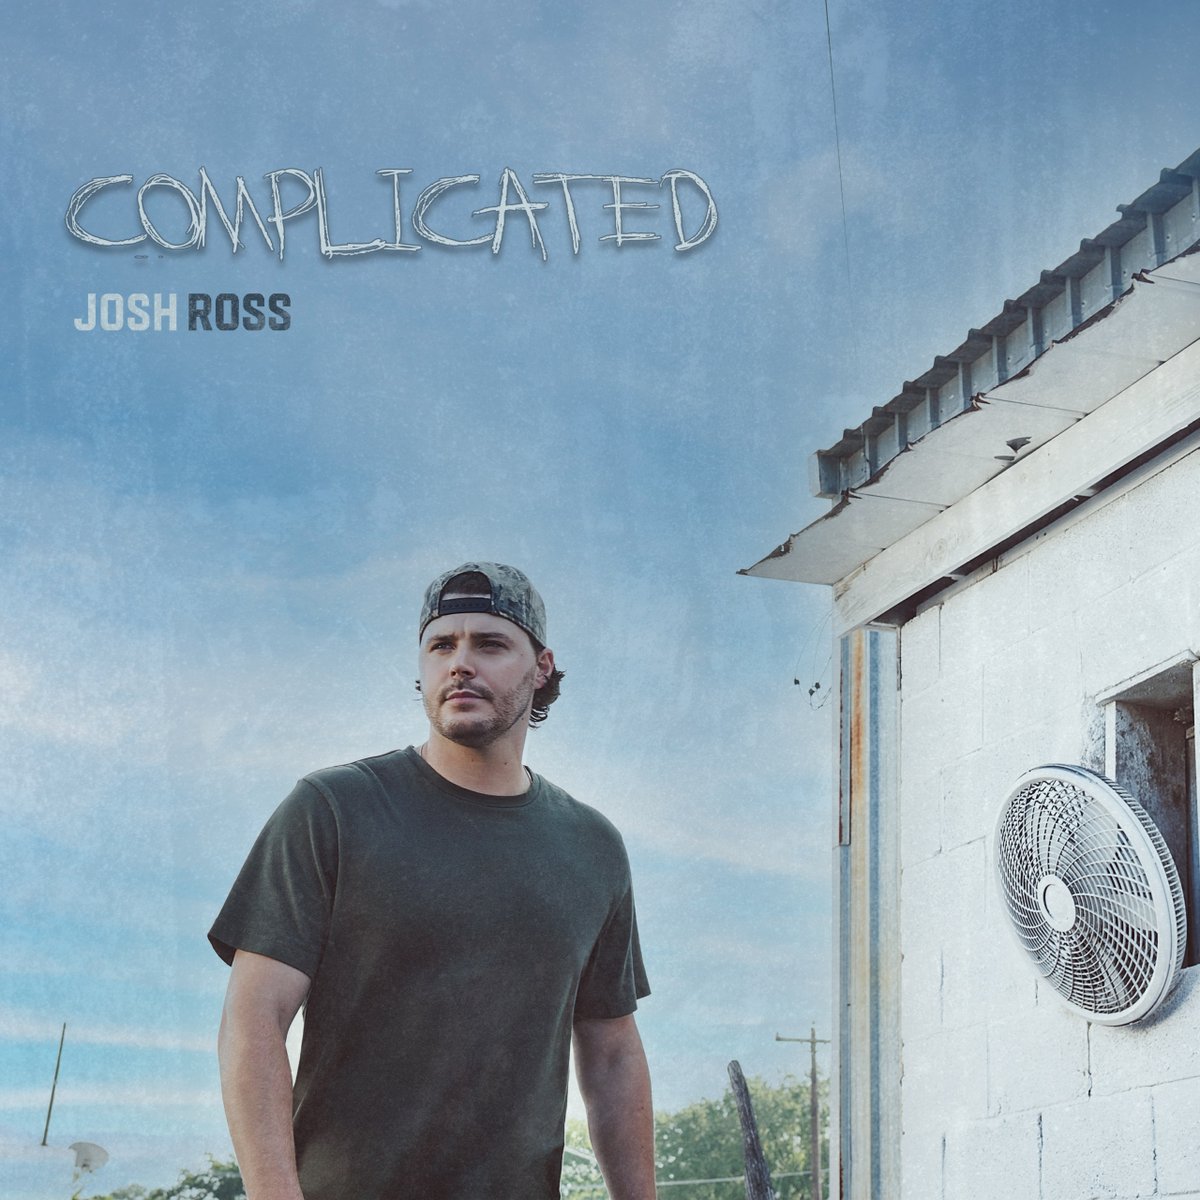 Congratulations to @musicjoshross on the release of his new EP 💿

We'll be listening to 'Complicated' on repeat ahead of his performance at #HighwaysFestival next month! Grab your tickets now 👉 livenation.uk/fkLz50QJXog